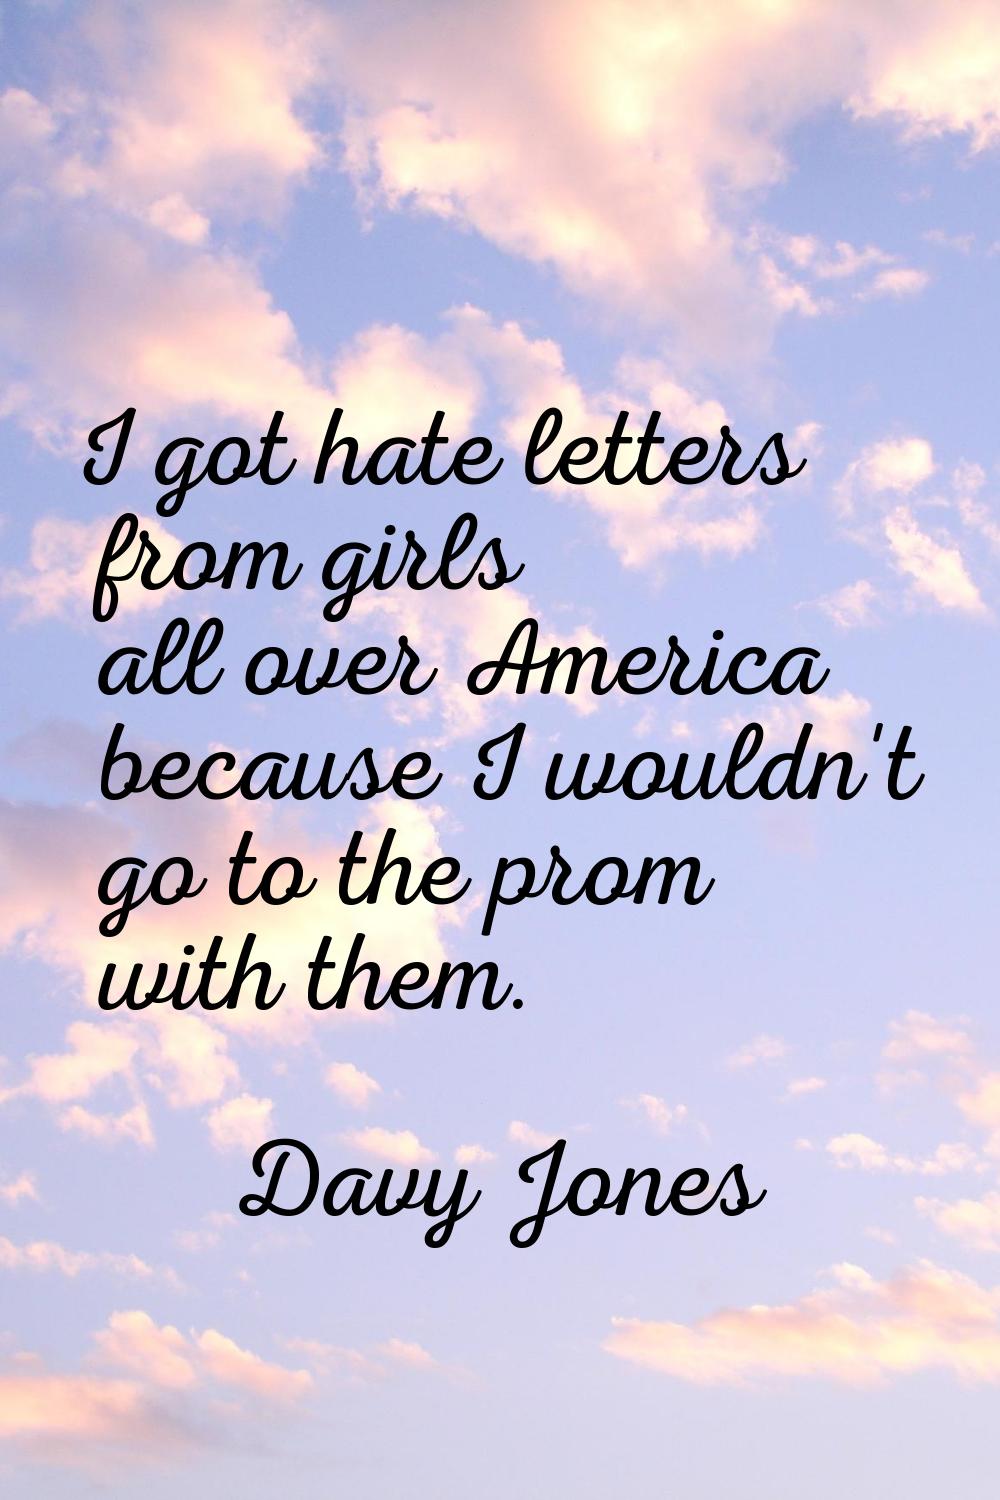 I got hate letters from girls all over America because I wouldn't go to the prom with them.